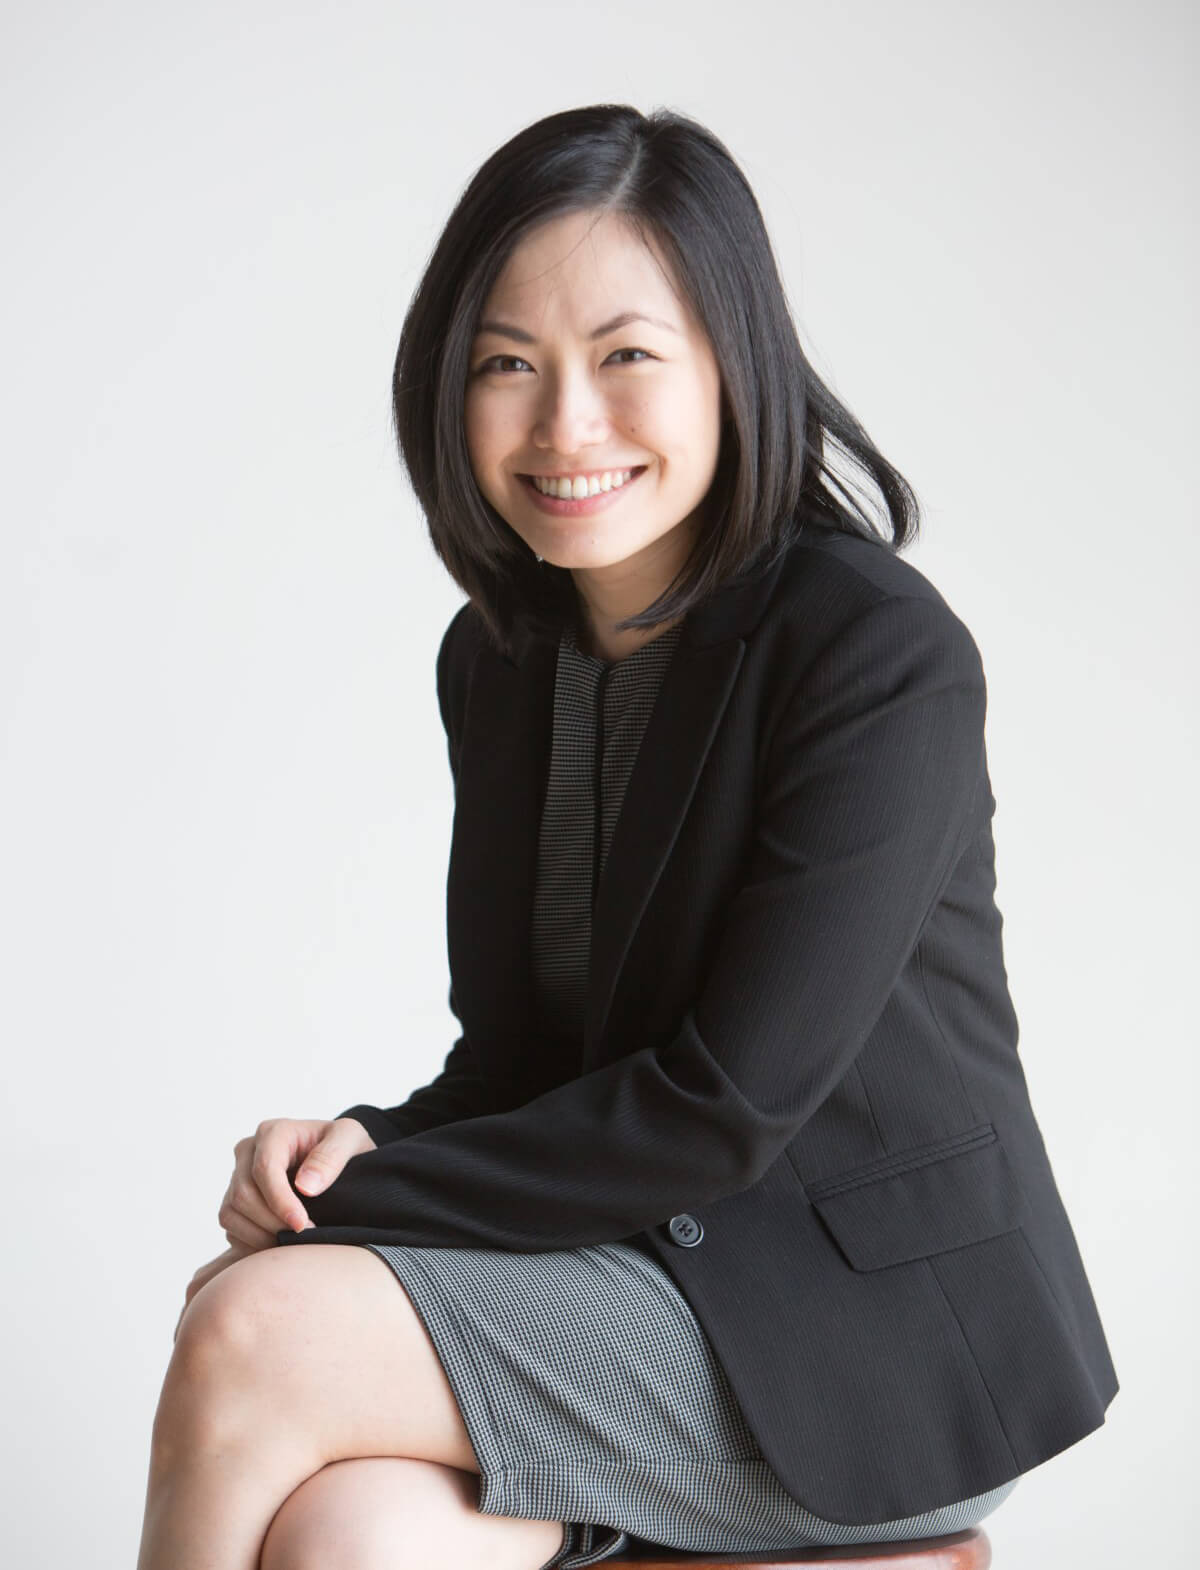 Teh Li-Jian, Head of talent management & employer branding of Group human resources at Sunway Group posing for a portrait shot, dressed in a grey dress and black blazer